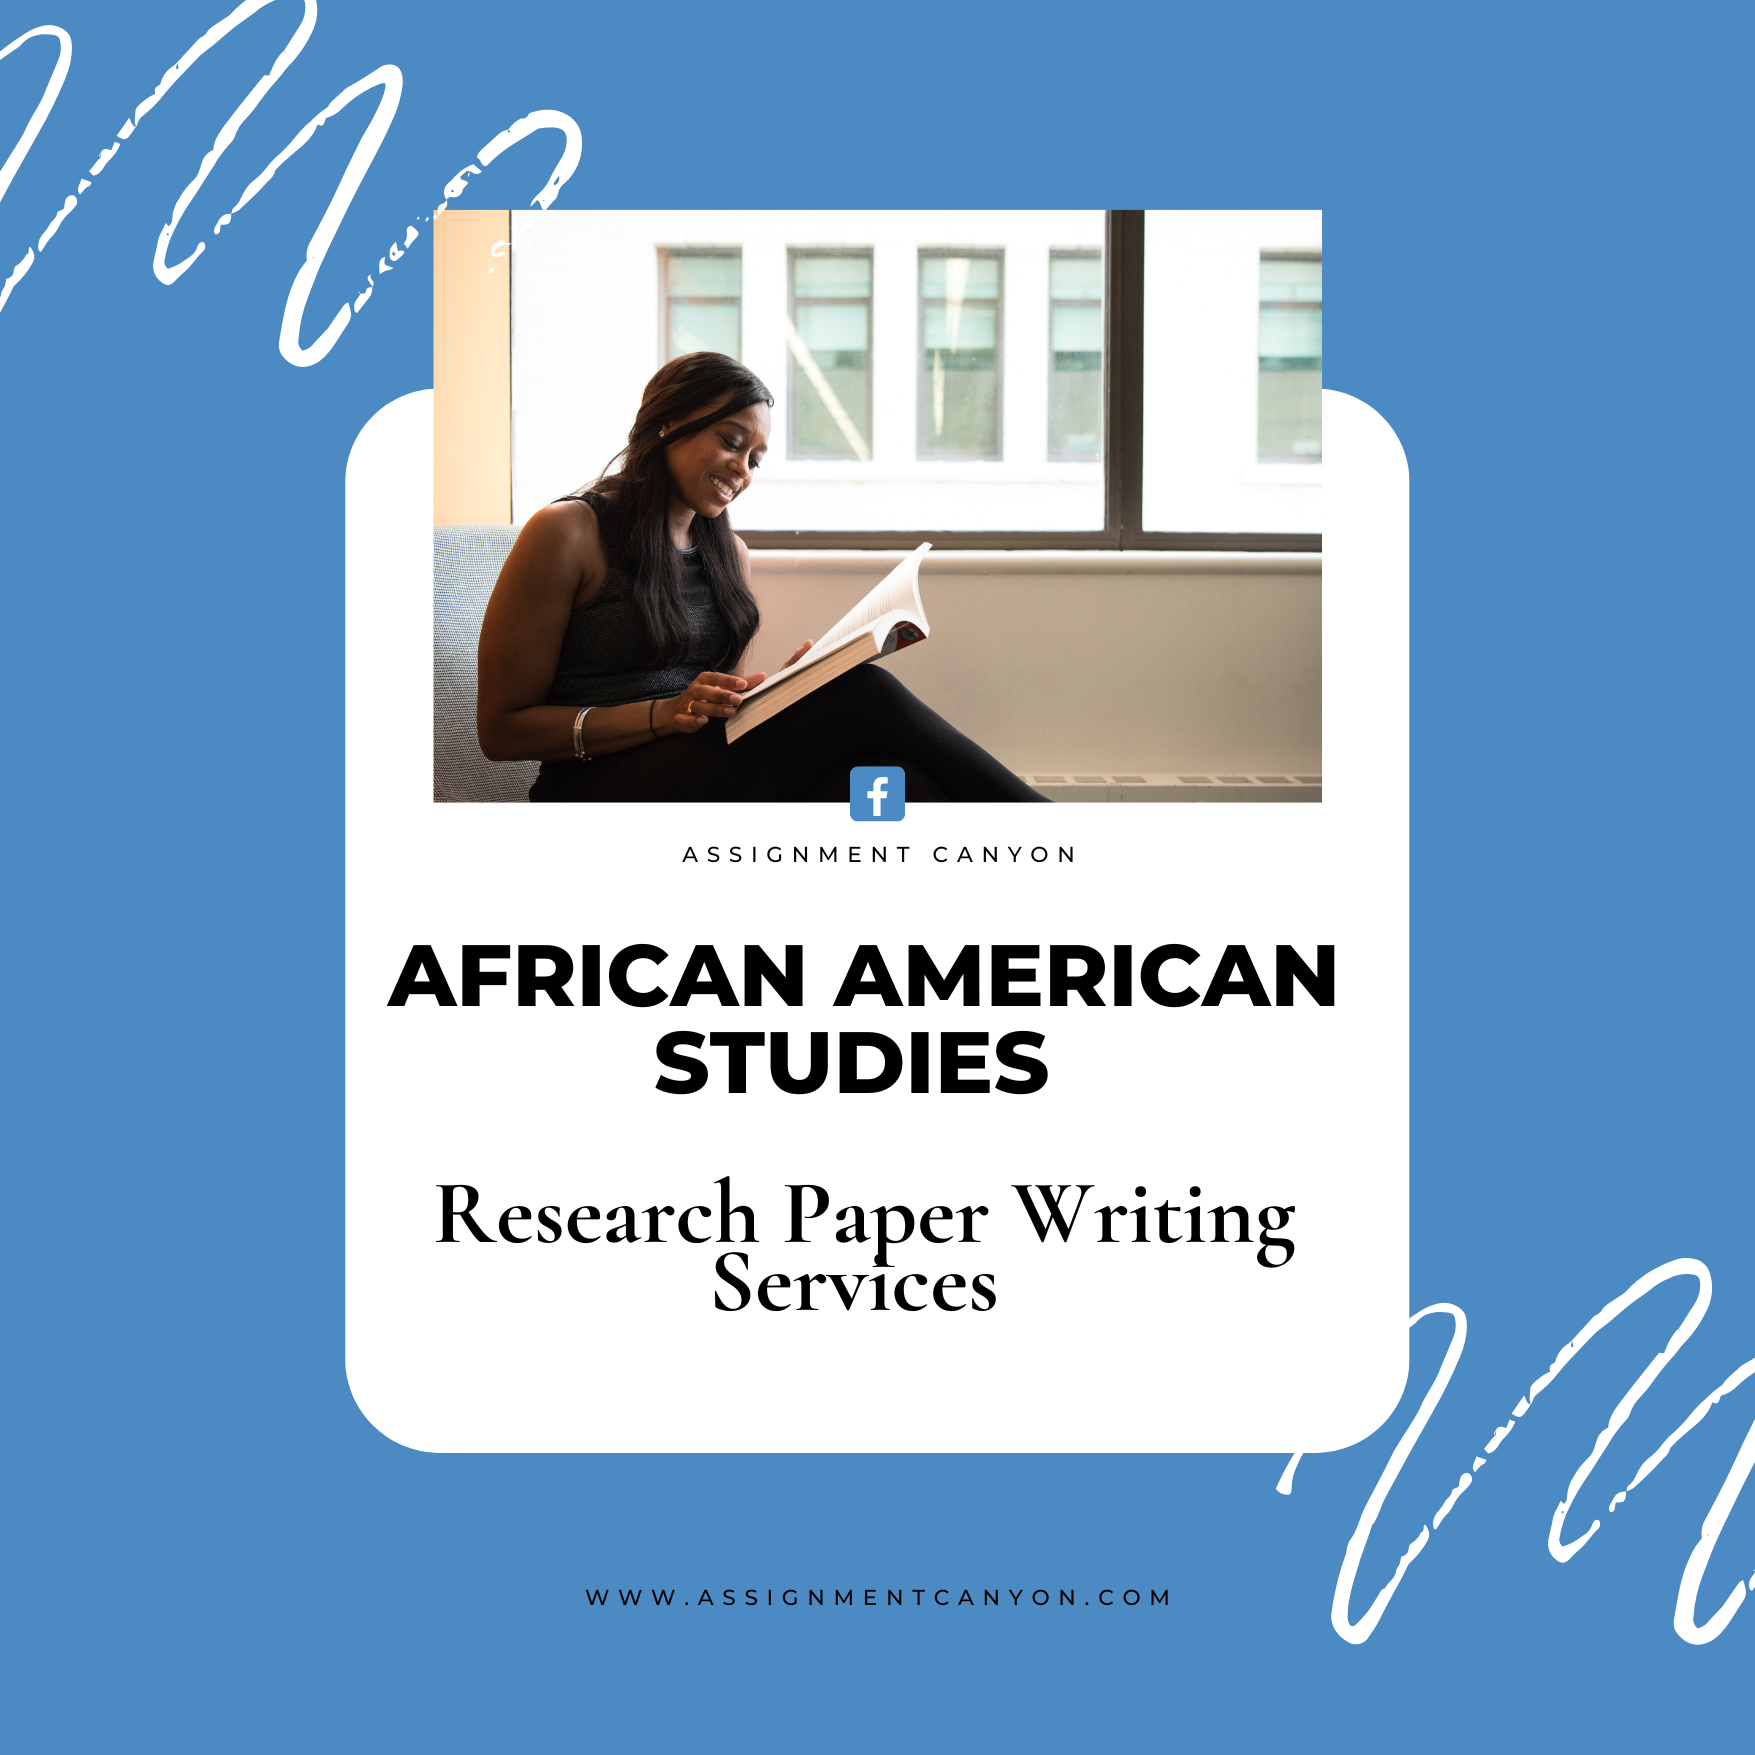 Do you need African American Studies Research Paper Writing Services? - Get that help from Assignment Canyon at affordable rates!